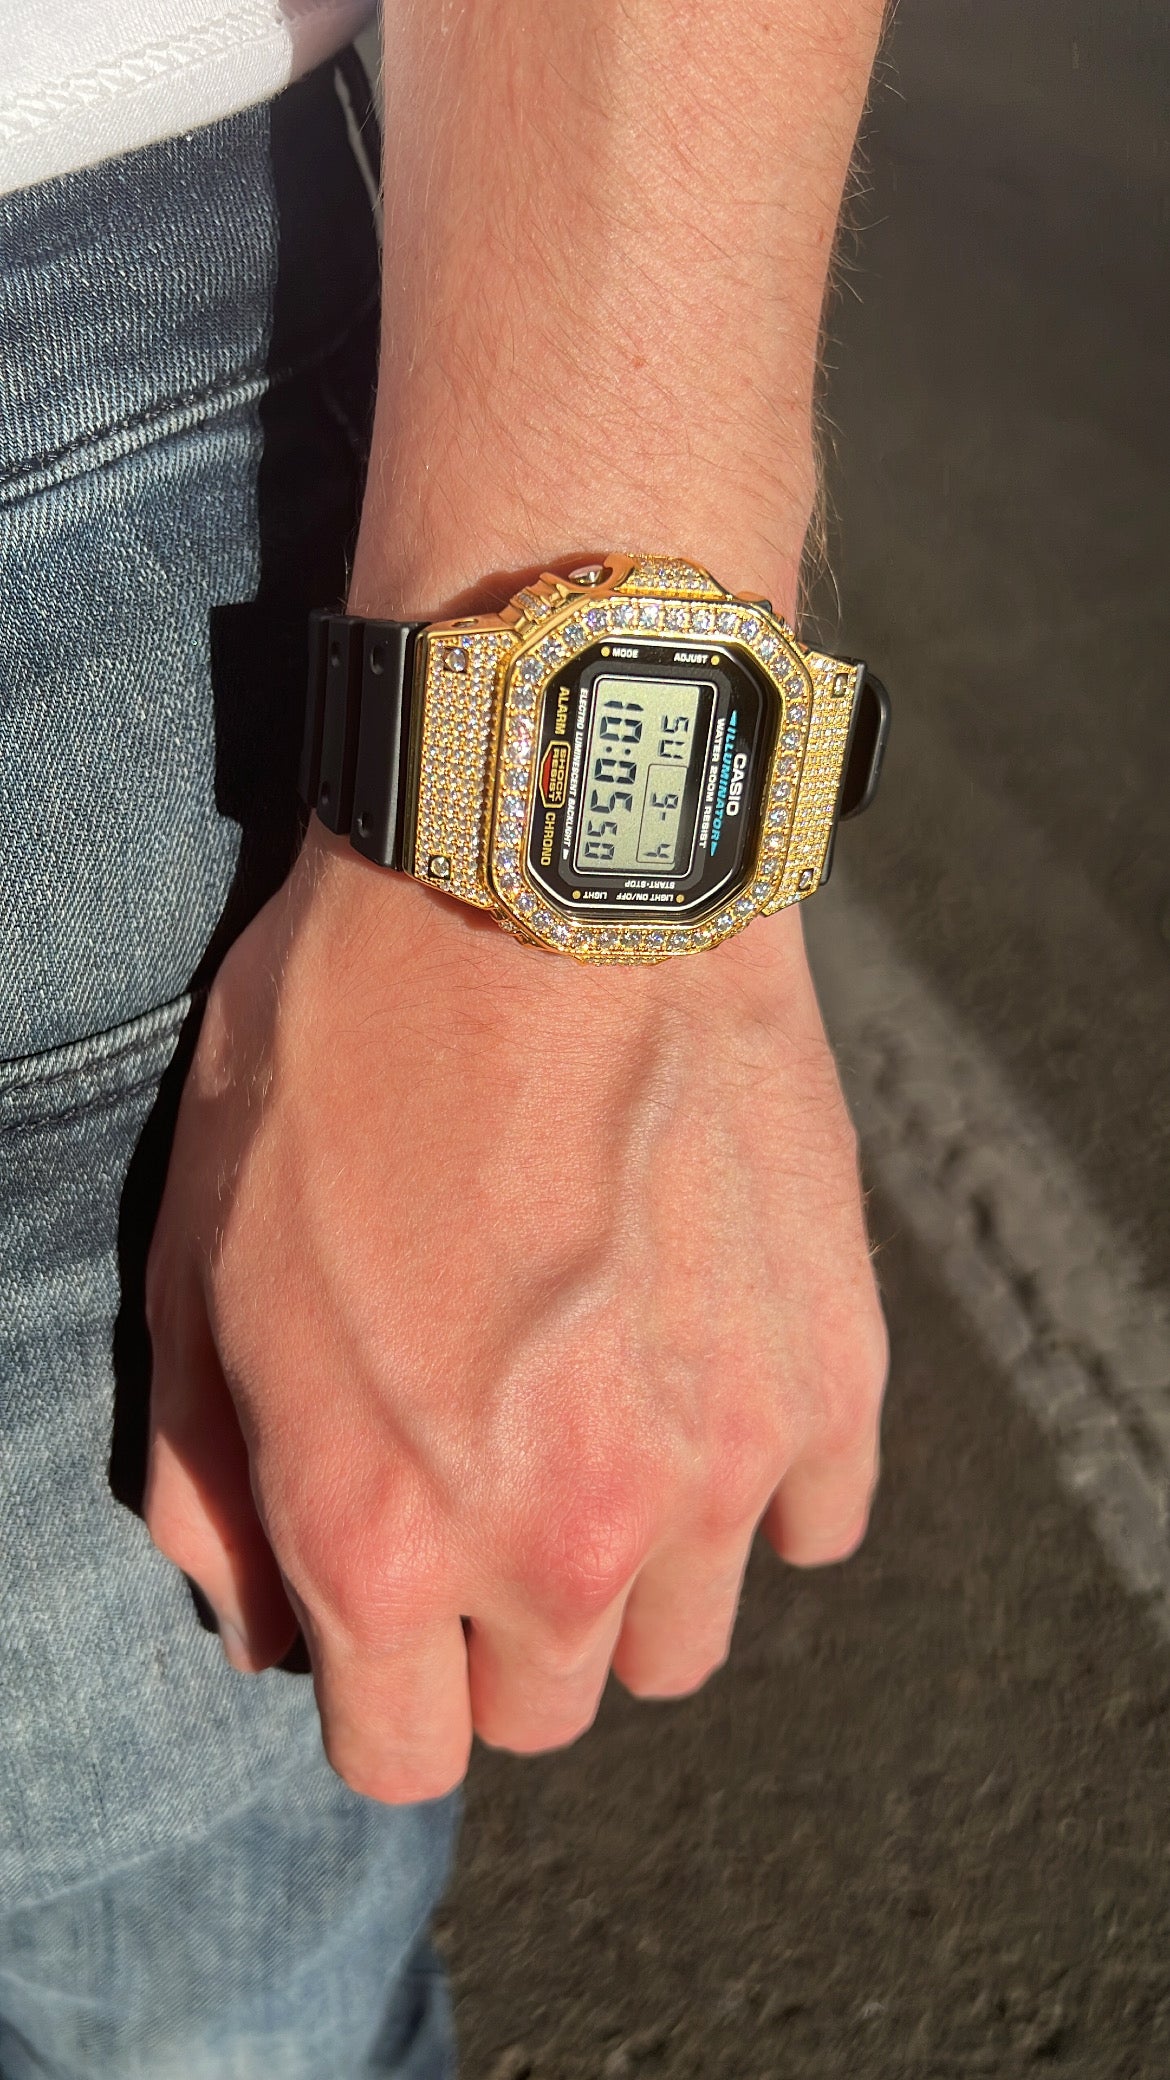 Dw5600 Moissanite Watch - TheShopIceStore.com Yellow